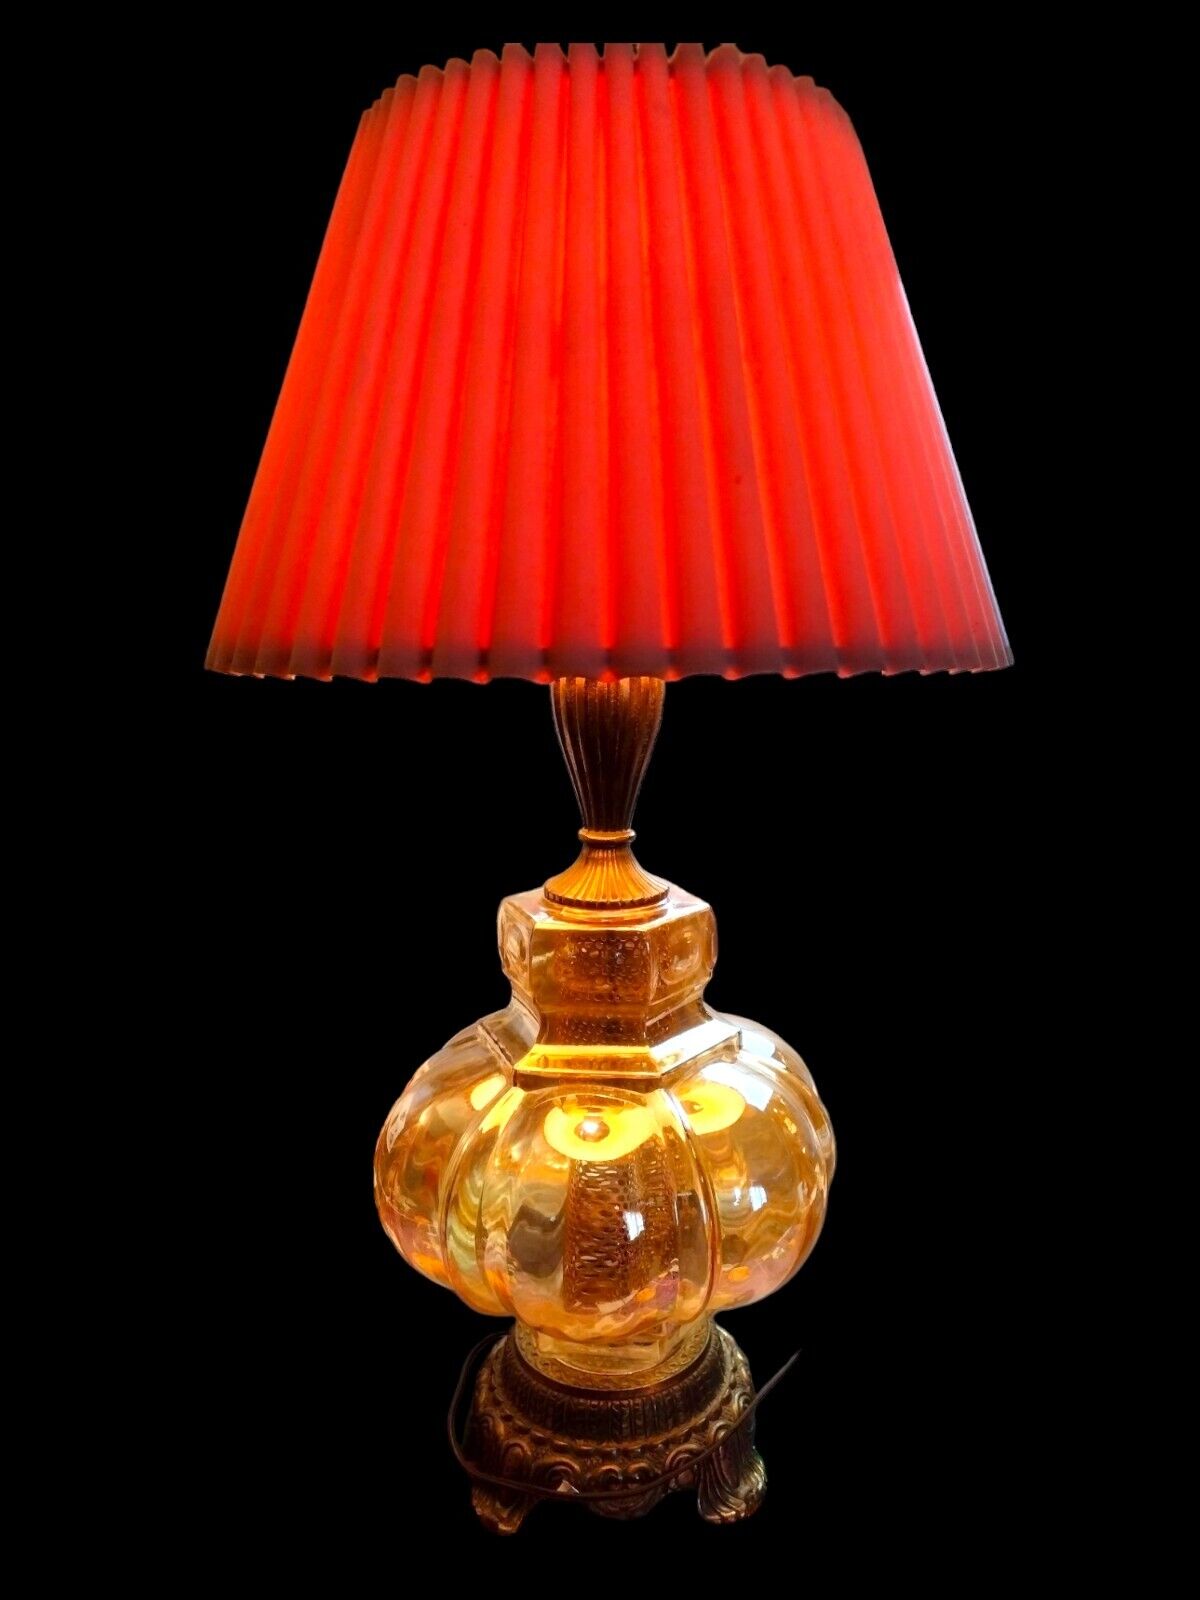 Stunning Vintage Authentic Carl Falkenstein Bubble Glass Lamp Iridescent Amber